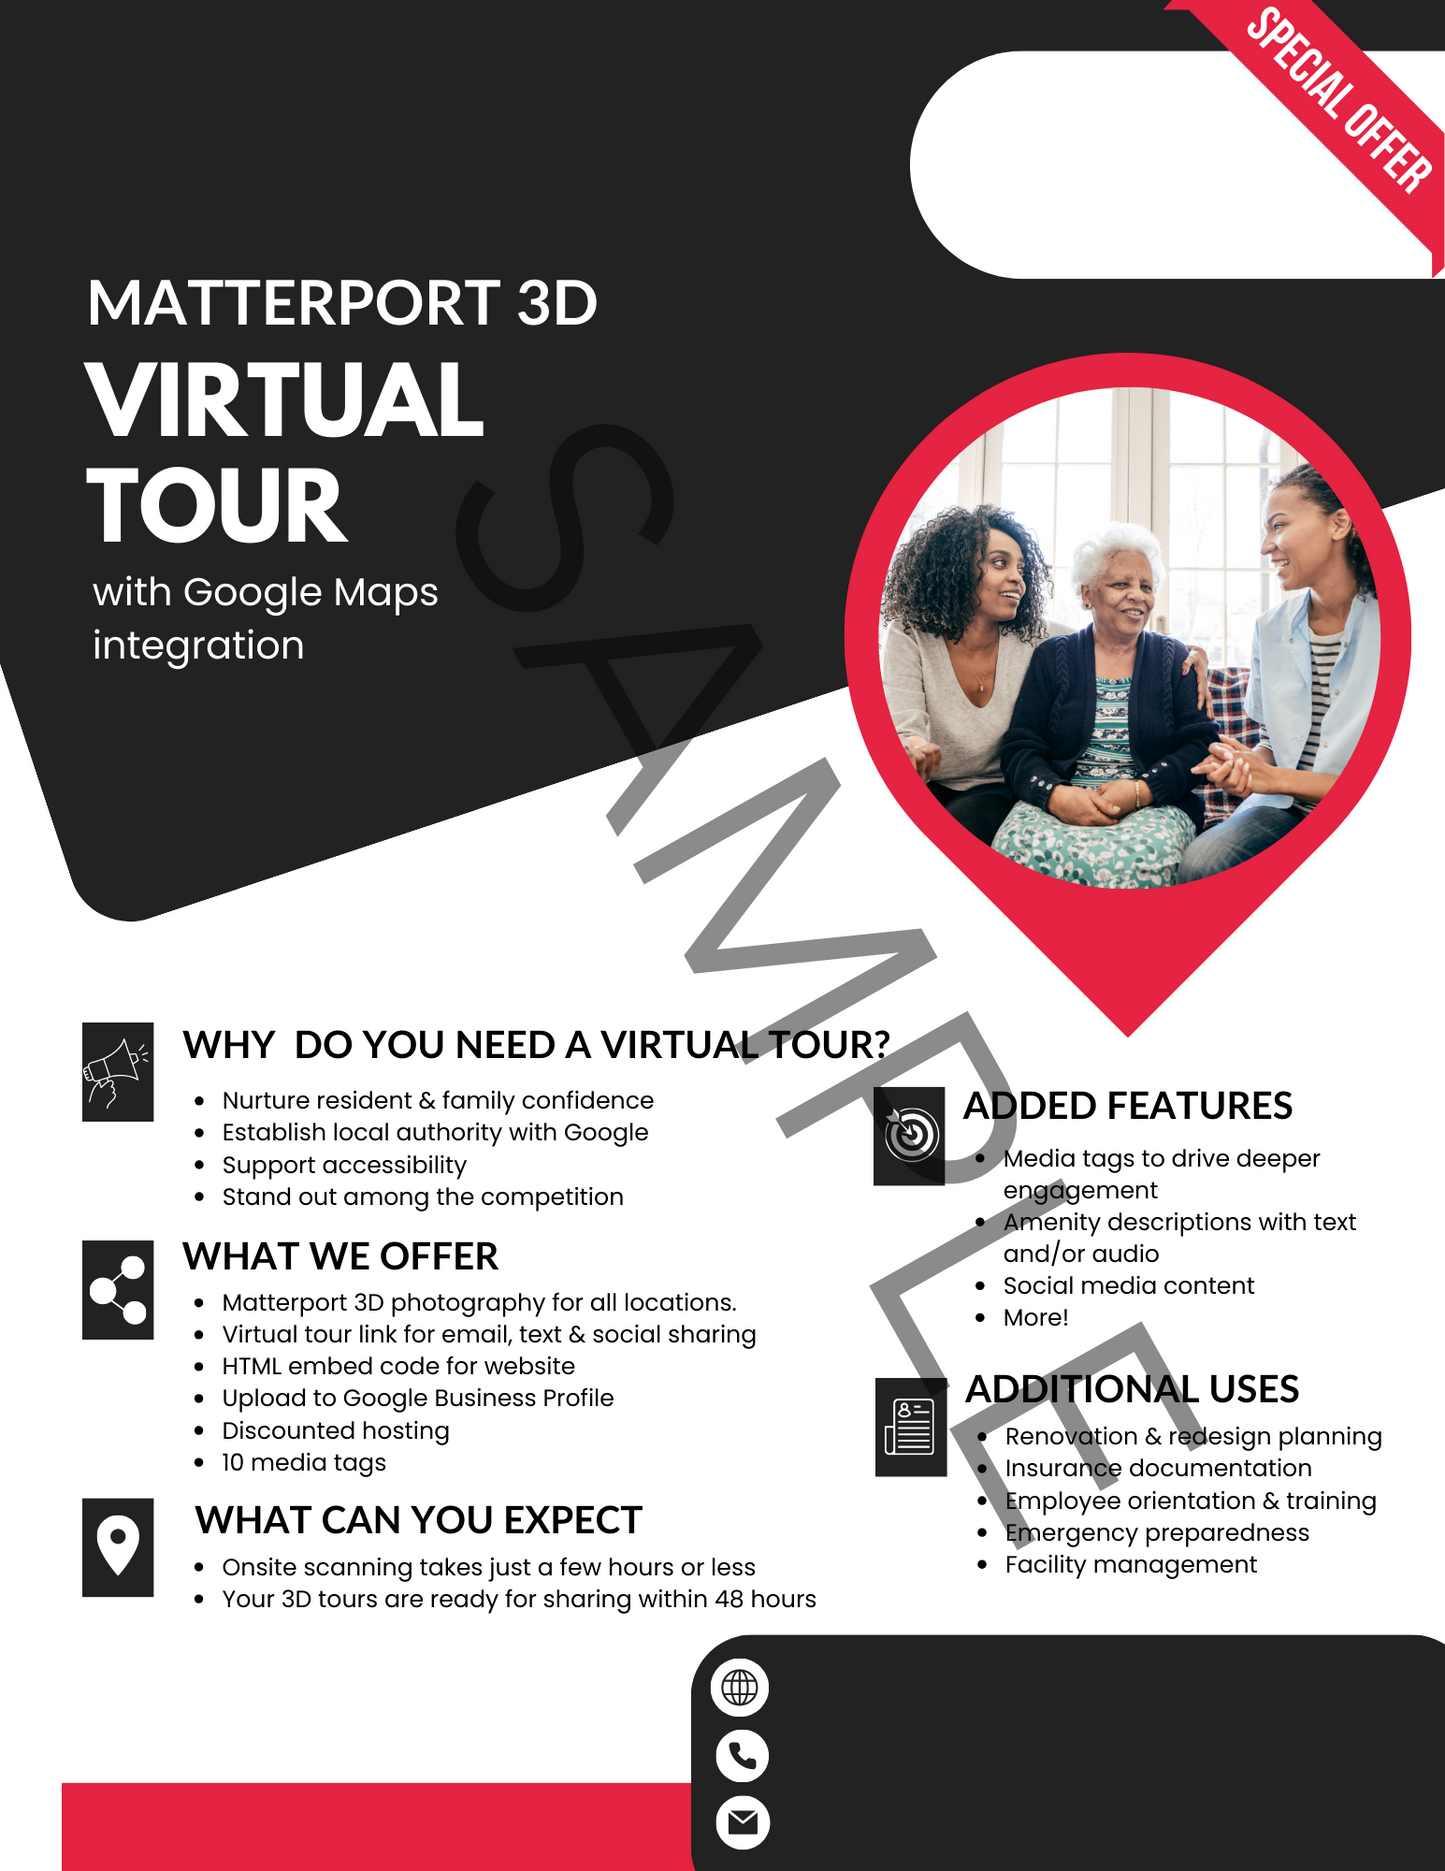 Matterport Marketing for Community Care Facilities